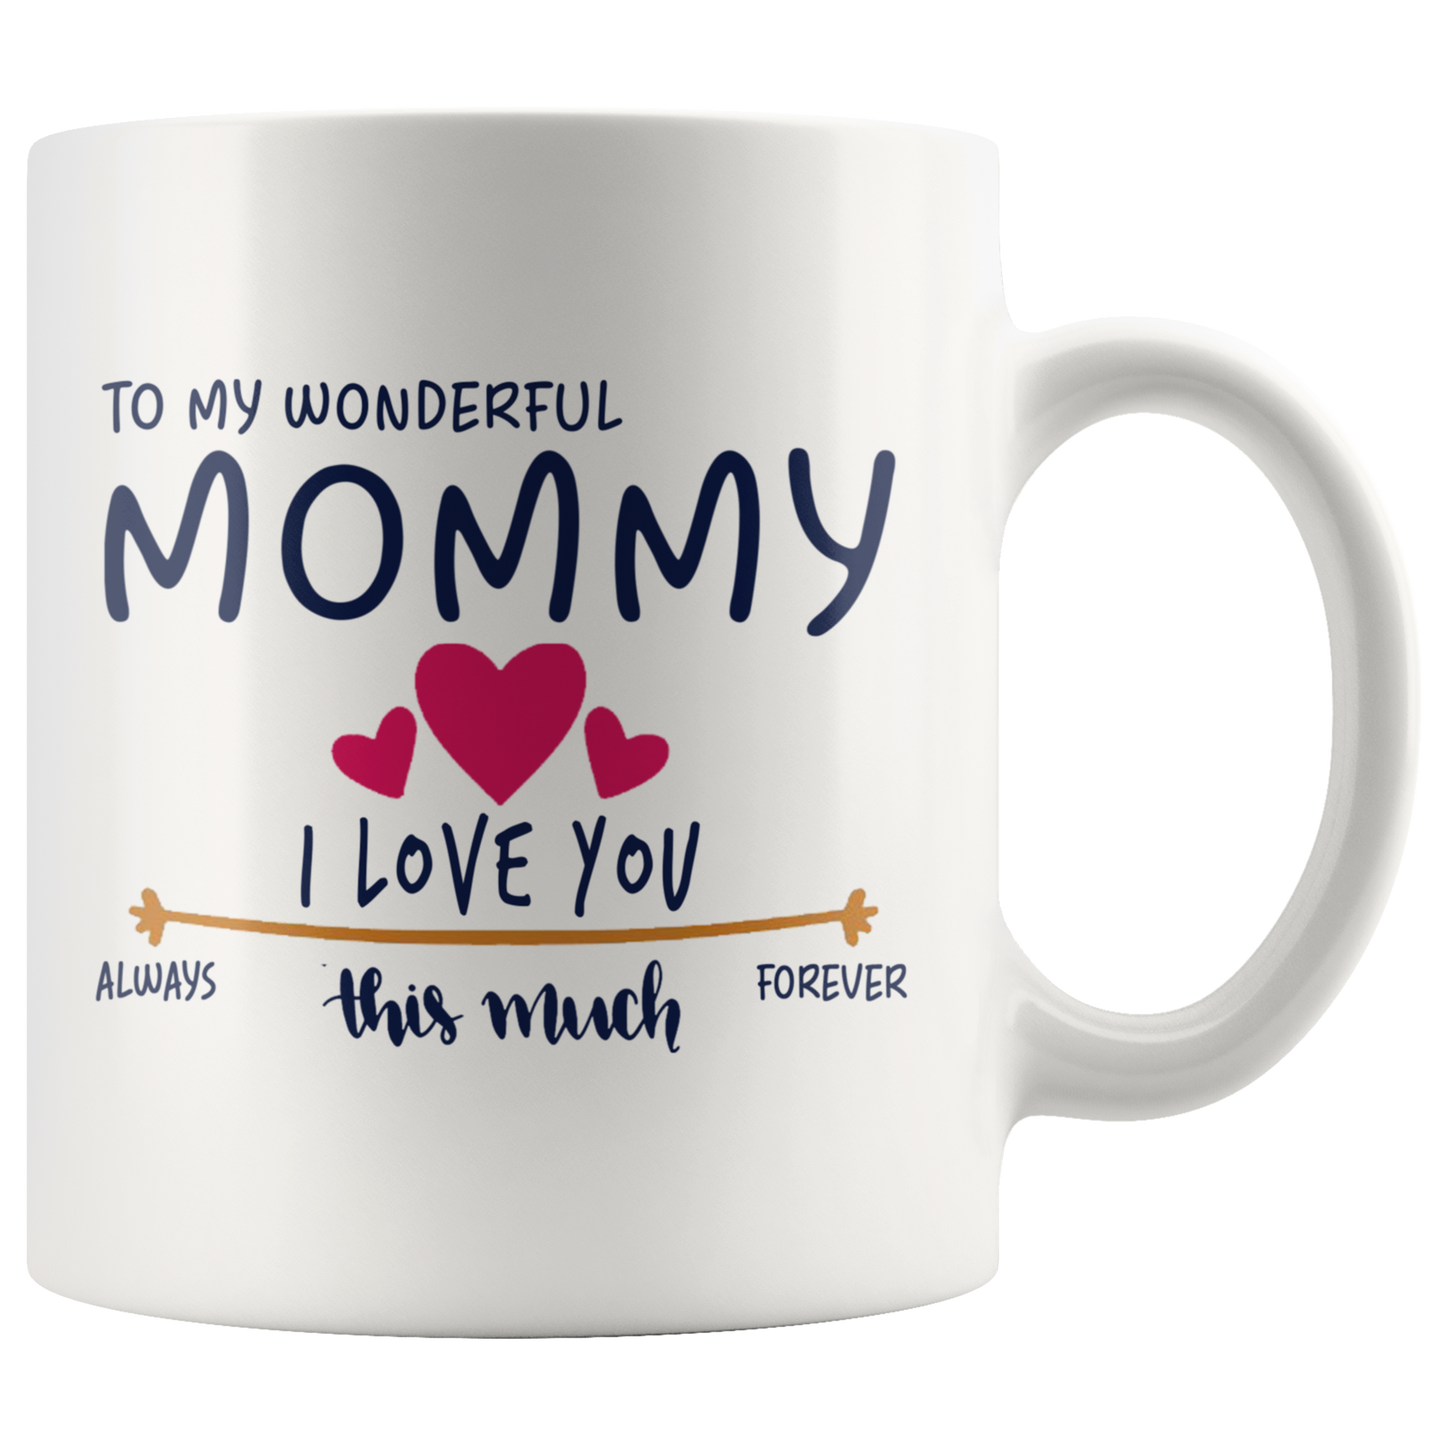 M-20470216-sp-25710 - [ Mommy | 1 ] (mug_11oz_white) Mom Day Gifts From Daughter or Son - To My Wonderful Mommy I